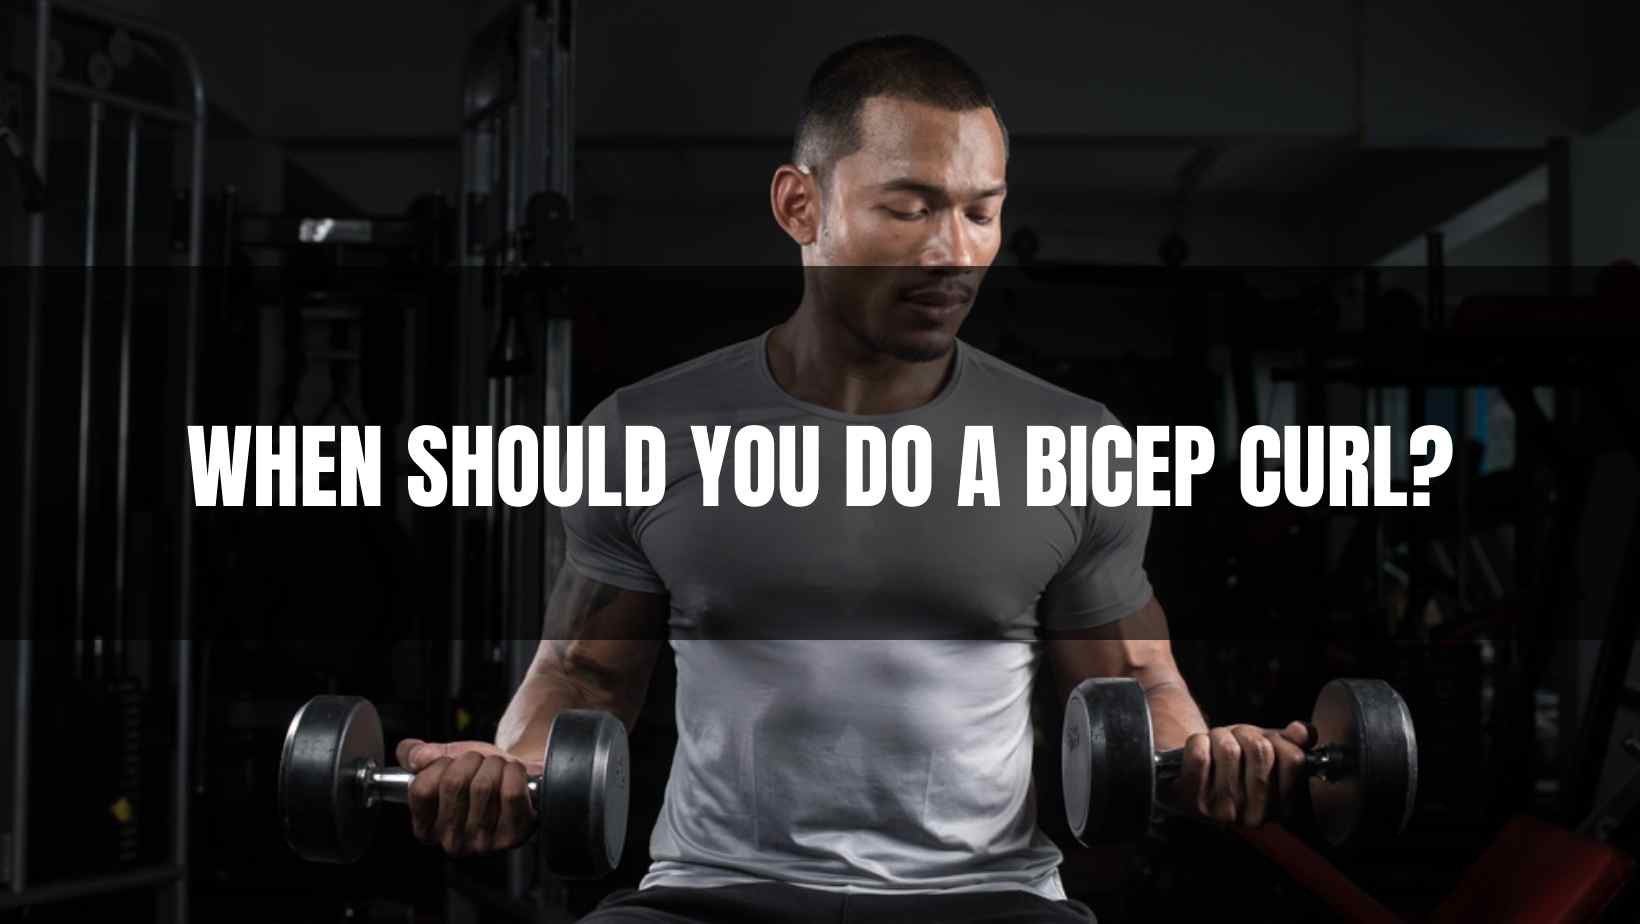 When Should You Do a Bicep Curl